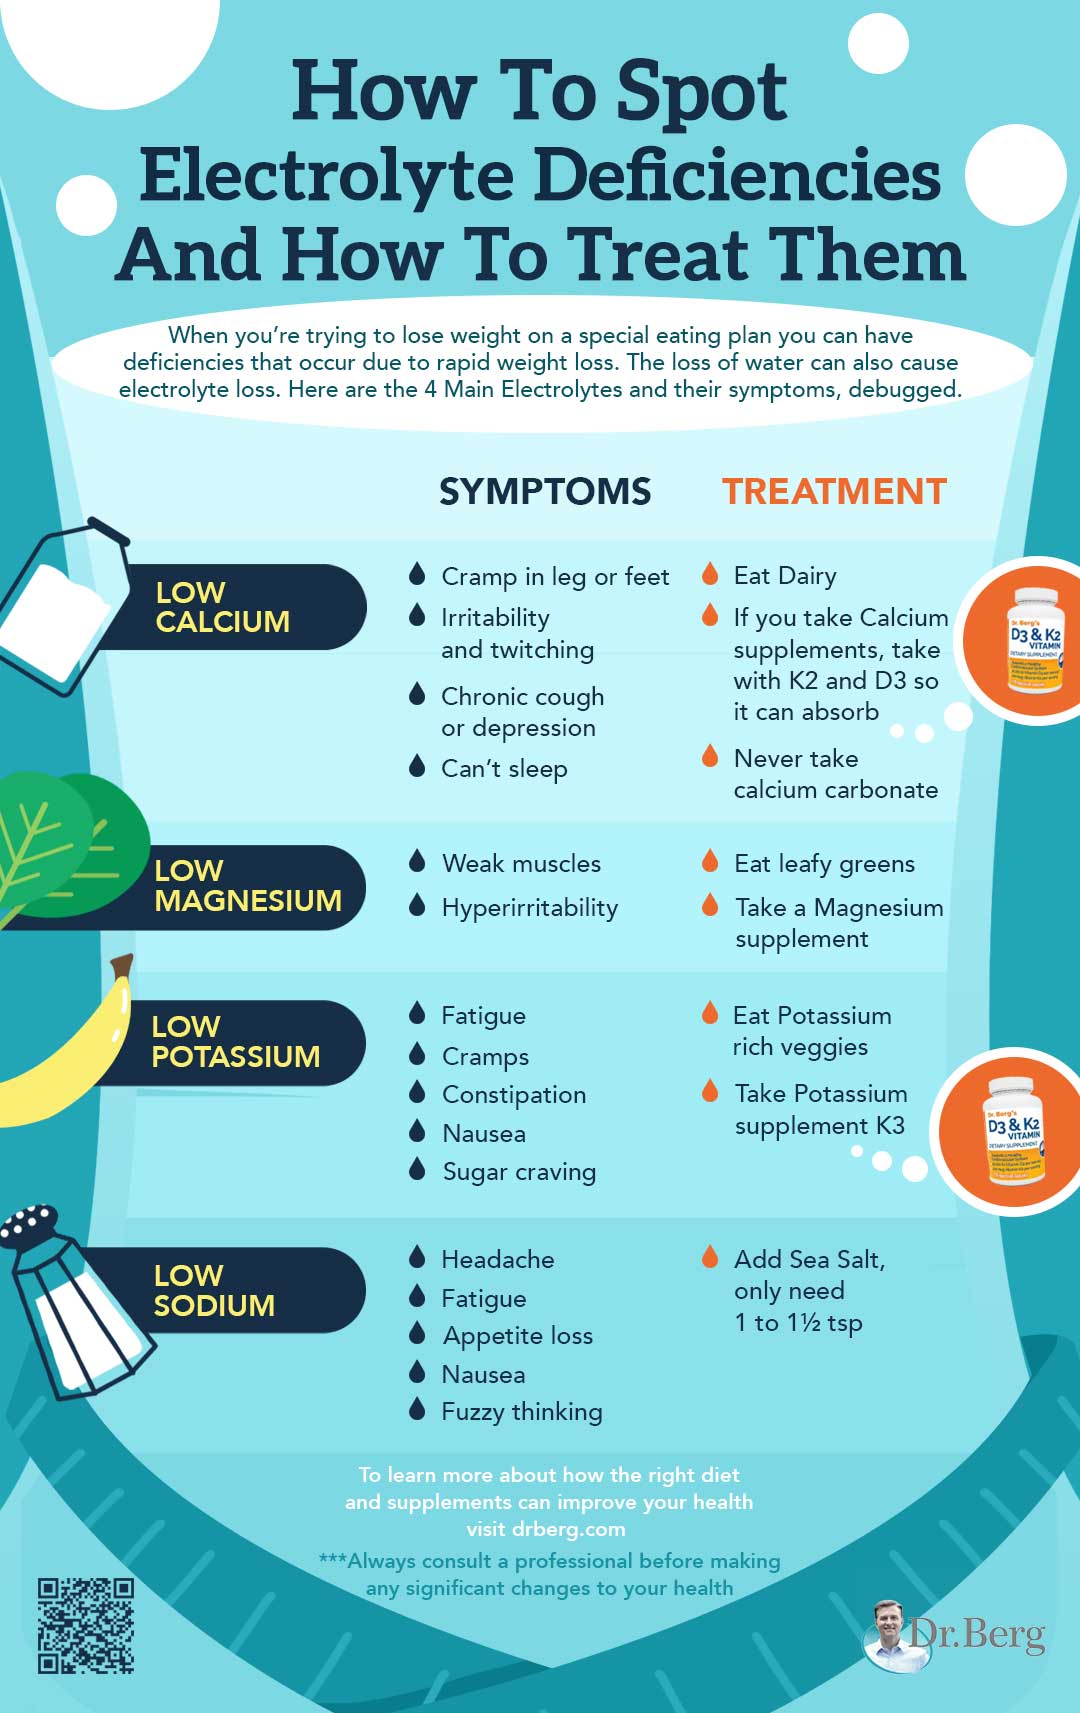 How to Spot Electrolyte Deficiencies and How to Treat Them Infographic | Symptoms of Low Electrolytes and How to Debug Them 